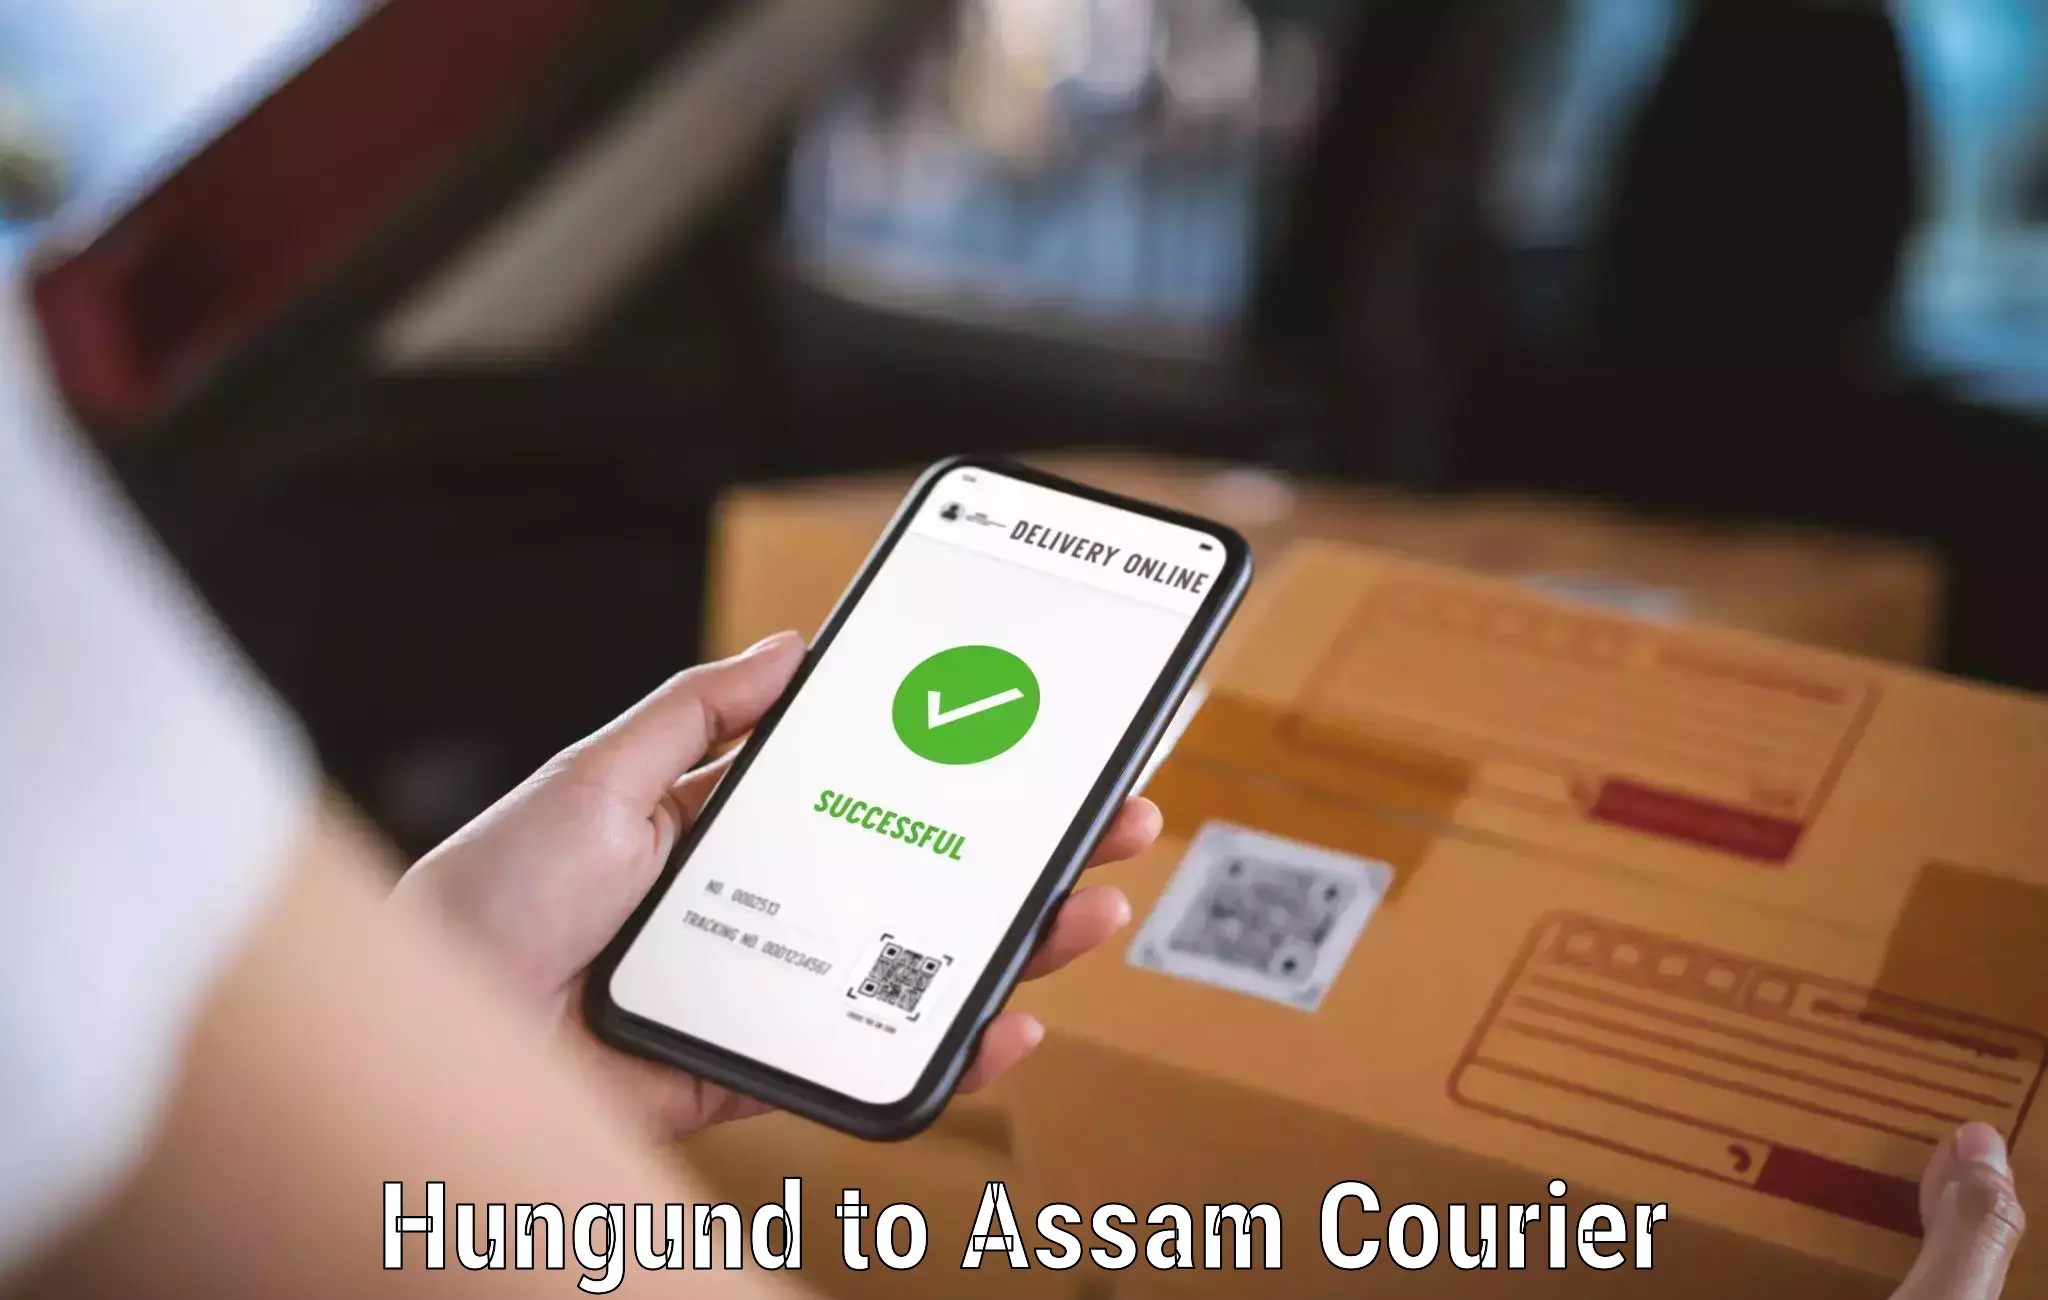 Customizable shipping options in Hungund to Tezpur University